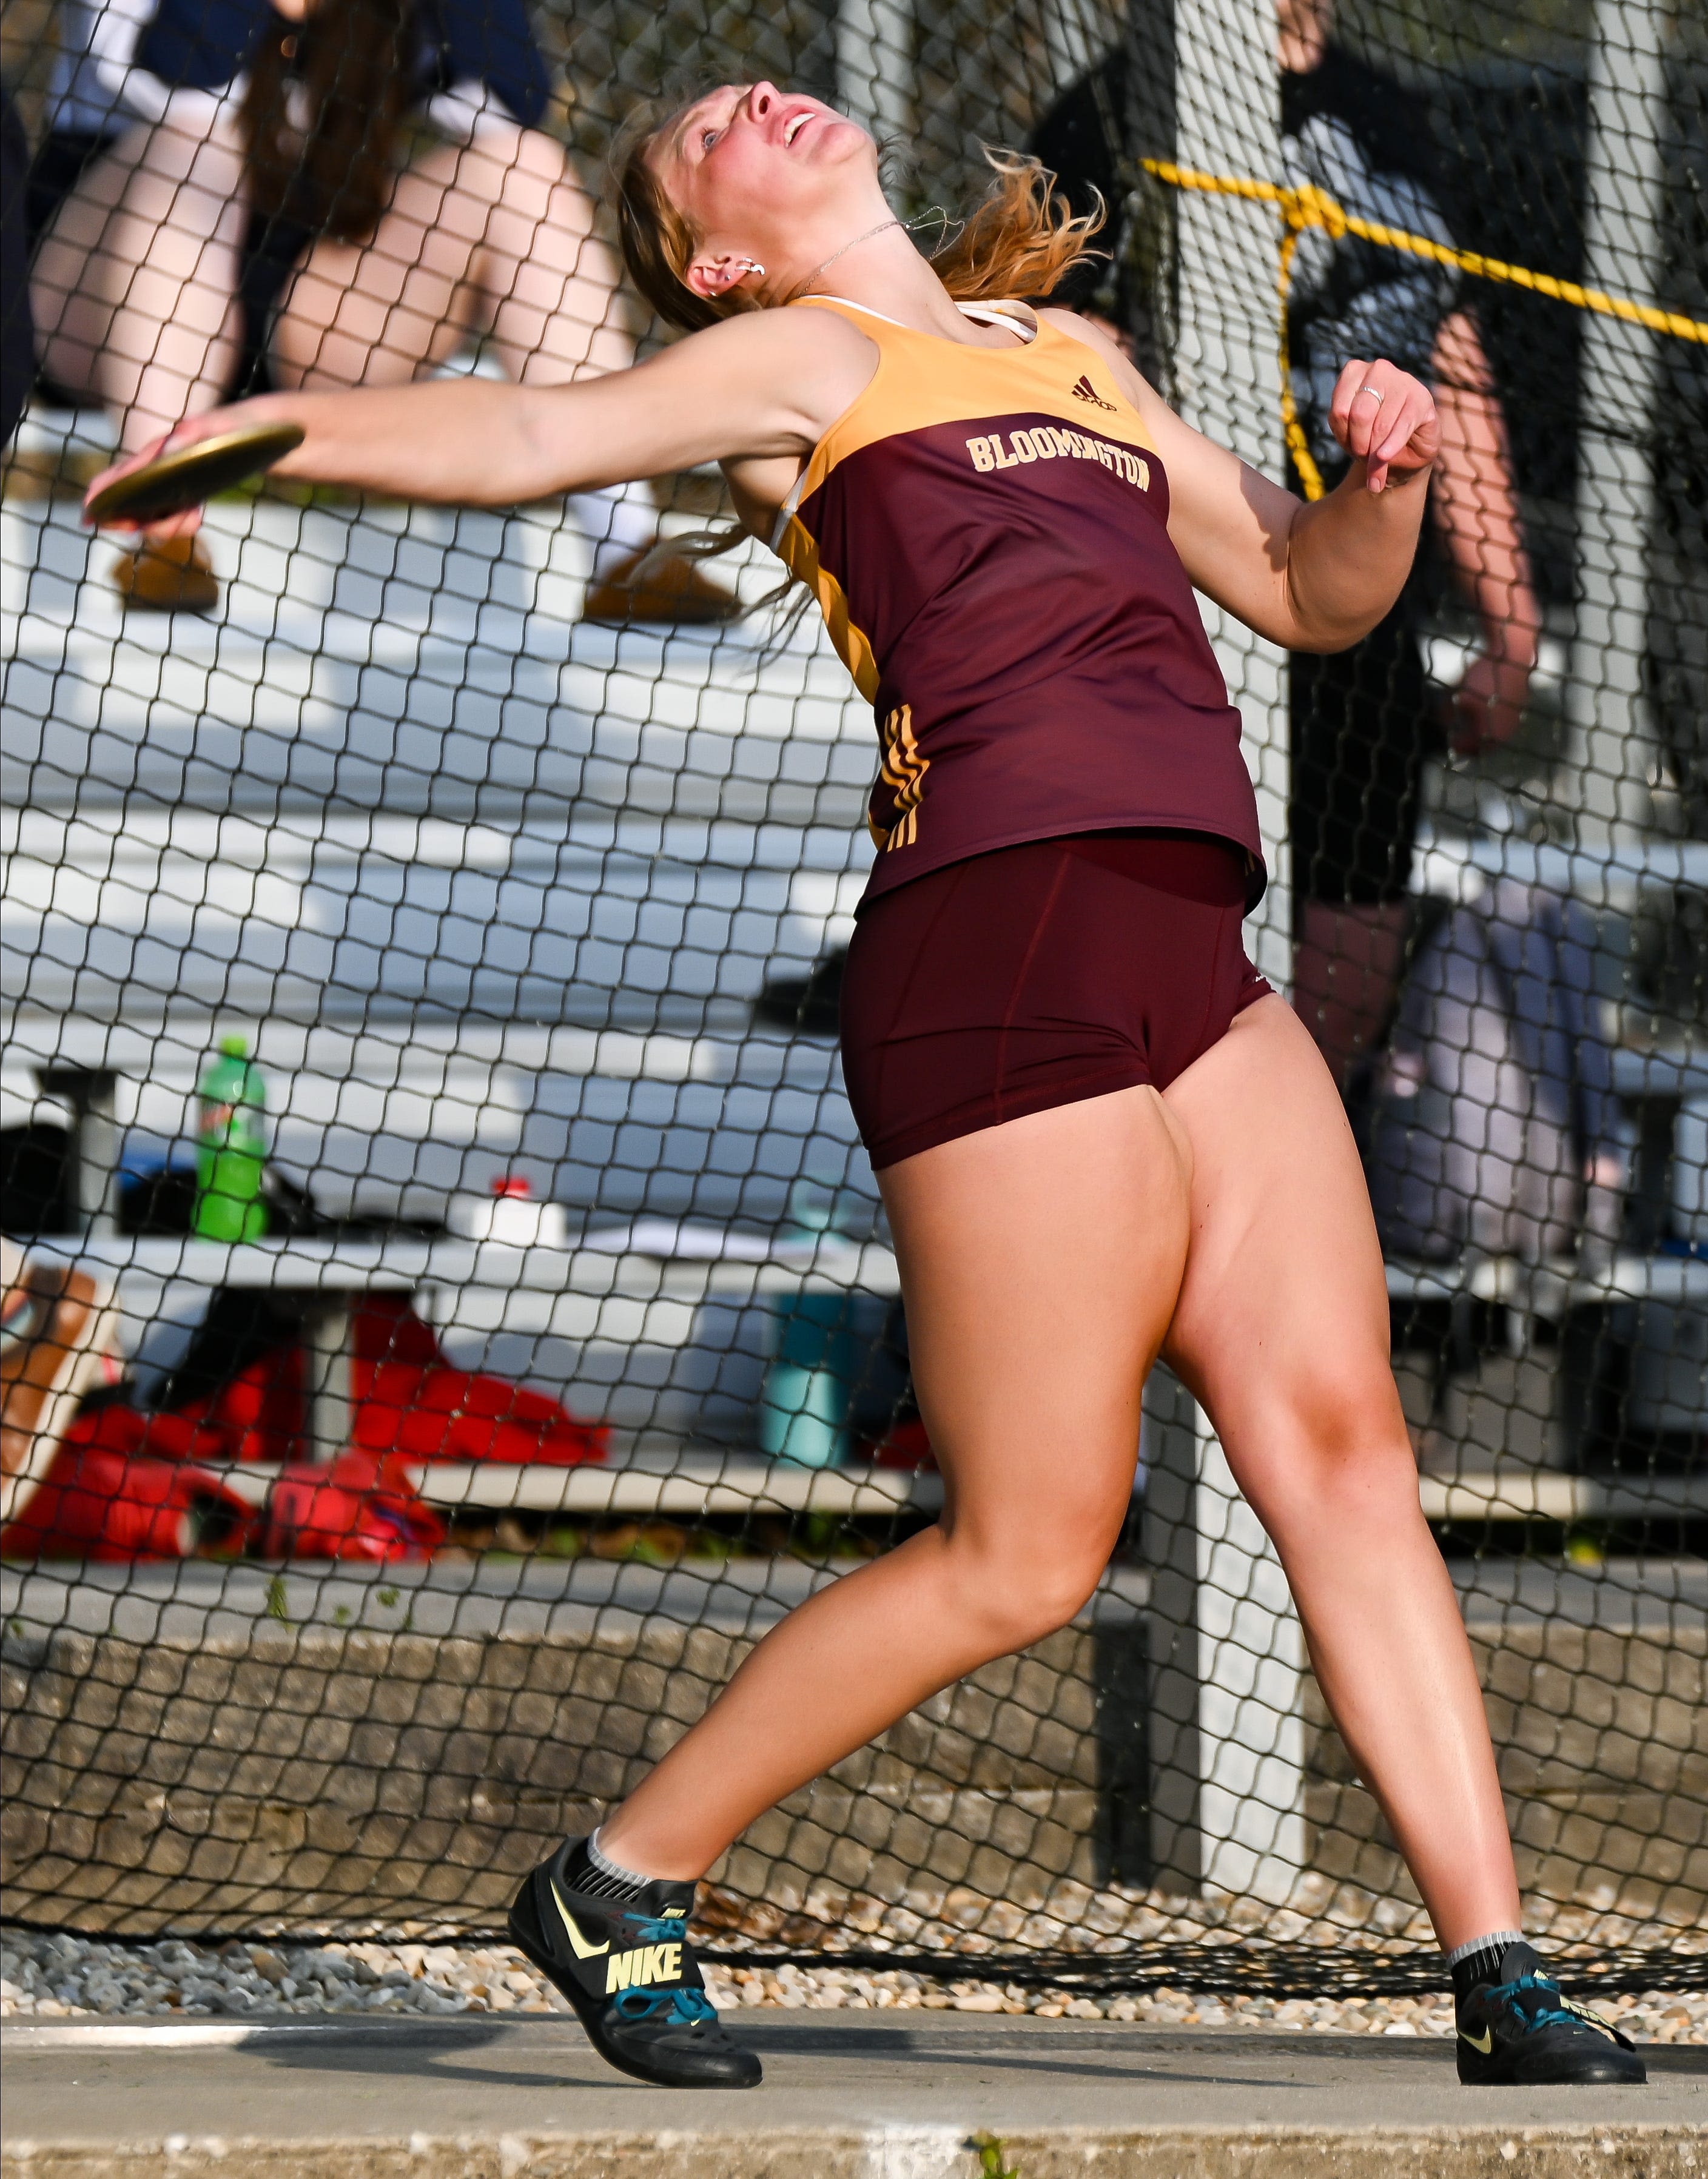 What to watch at the Bloomington North girls track regional: Storylines, top seeds